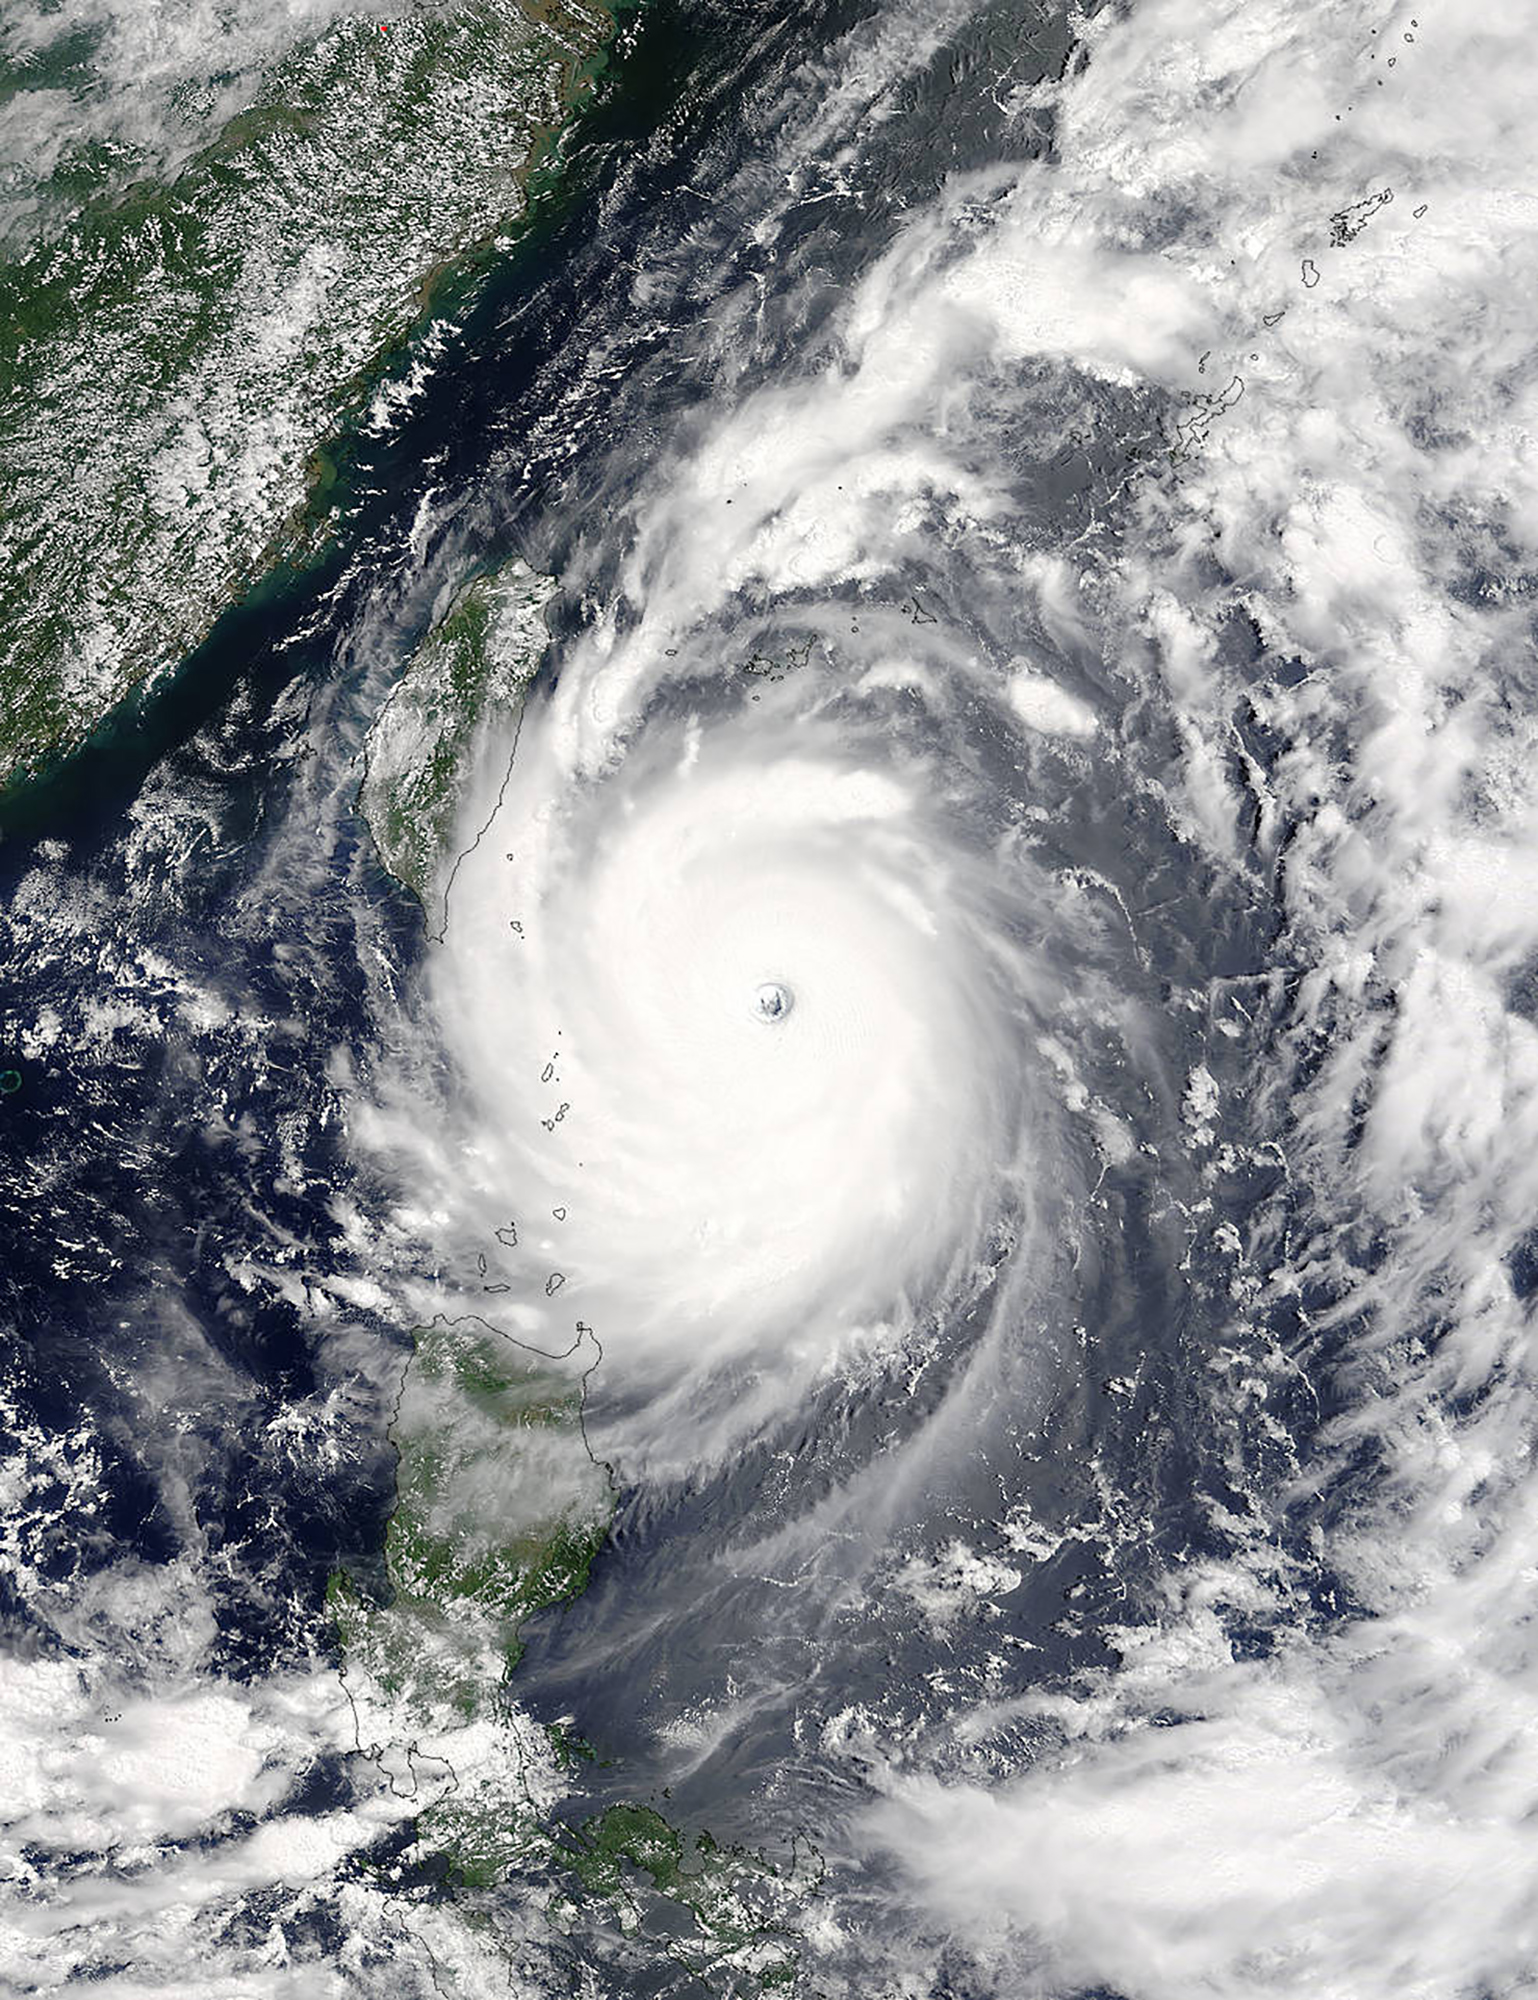 This image obtained from NASA on July 7, 2016, shows Super Typhoon Nepartak approaching Taiwan at 02:30 UTC on July 7 as captured by the MODIS instrument aboard NASA's Terra satellite. Taiwan cancelled more than 100 flights and shut schools and offices as the island braced for Nepartak, the first major tropical storm of the season. The typhoon was packing gusts of up to 245 kilometres an hour (152 miles an hour). It is expected to make landfall early July 8, according to Taiwan's Central Weather Bureau.  / AFP PHOTO / NASA / HO / RESTRICTED TO EDITORIAL USE - MANDATORY CREDIT "AFP PHOTO / NASA Goddard MODIS Rapid Response/Jeff Schmaltz" - NO MARKETING NO ADVERTISING CAMPAIGNS - DISTRIBUTED AS A SERVICE TO CLIENTS